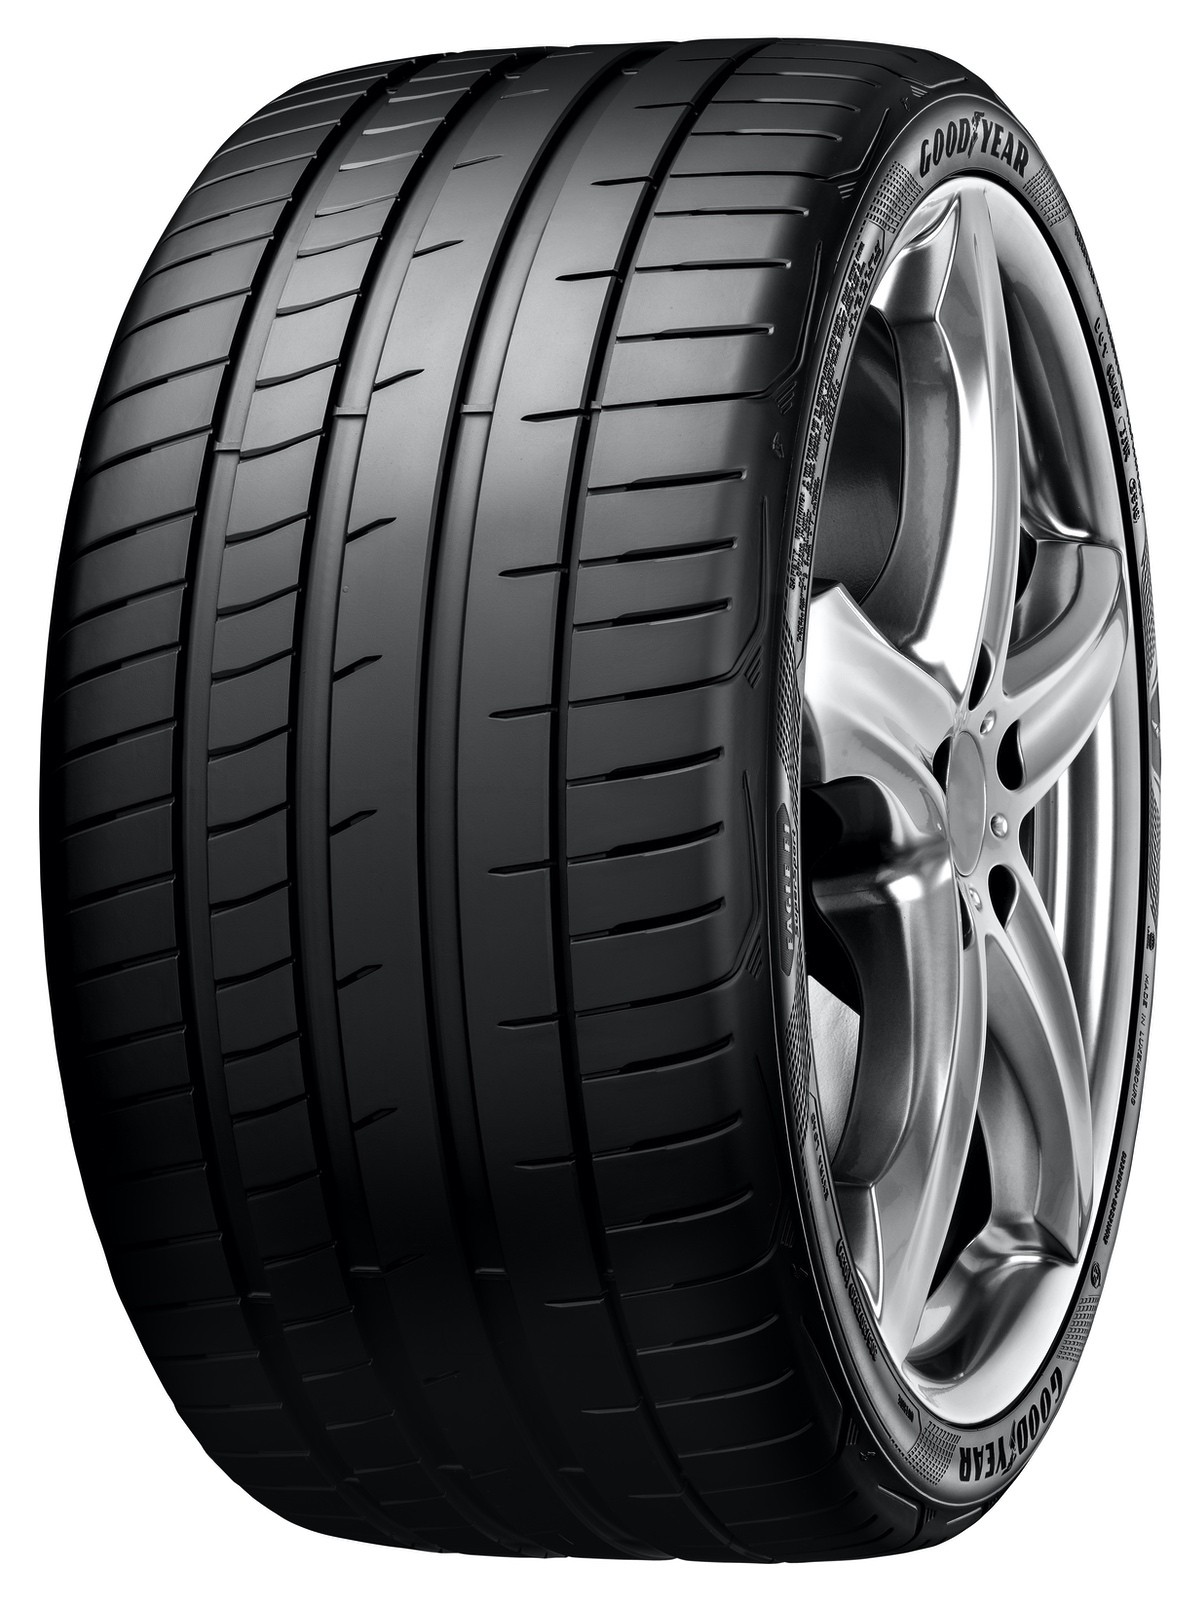 Gomme Nuove Goodyear 225/40 R18 92Y EA F1 SUPERSPORT VW FP XL pneumatici nuovi Estivo